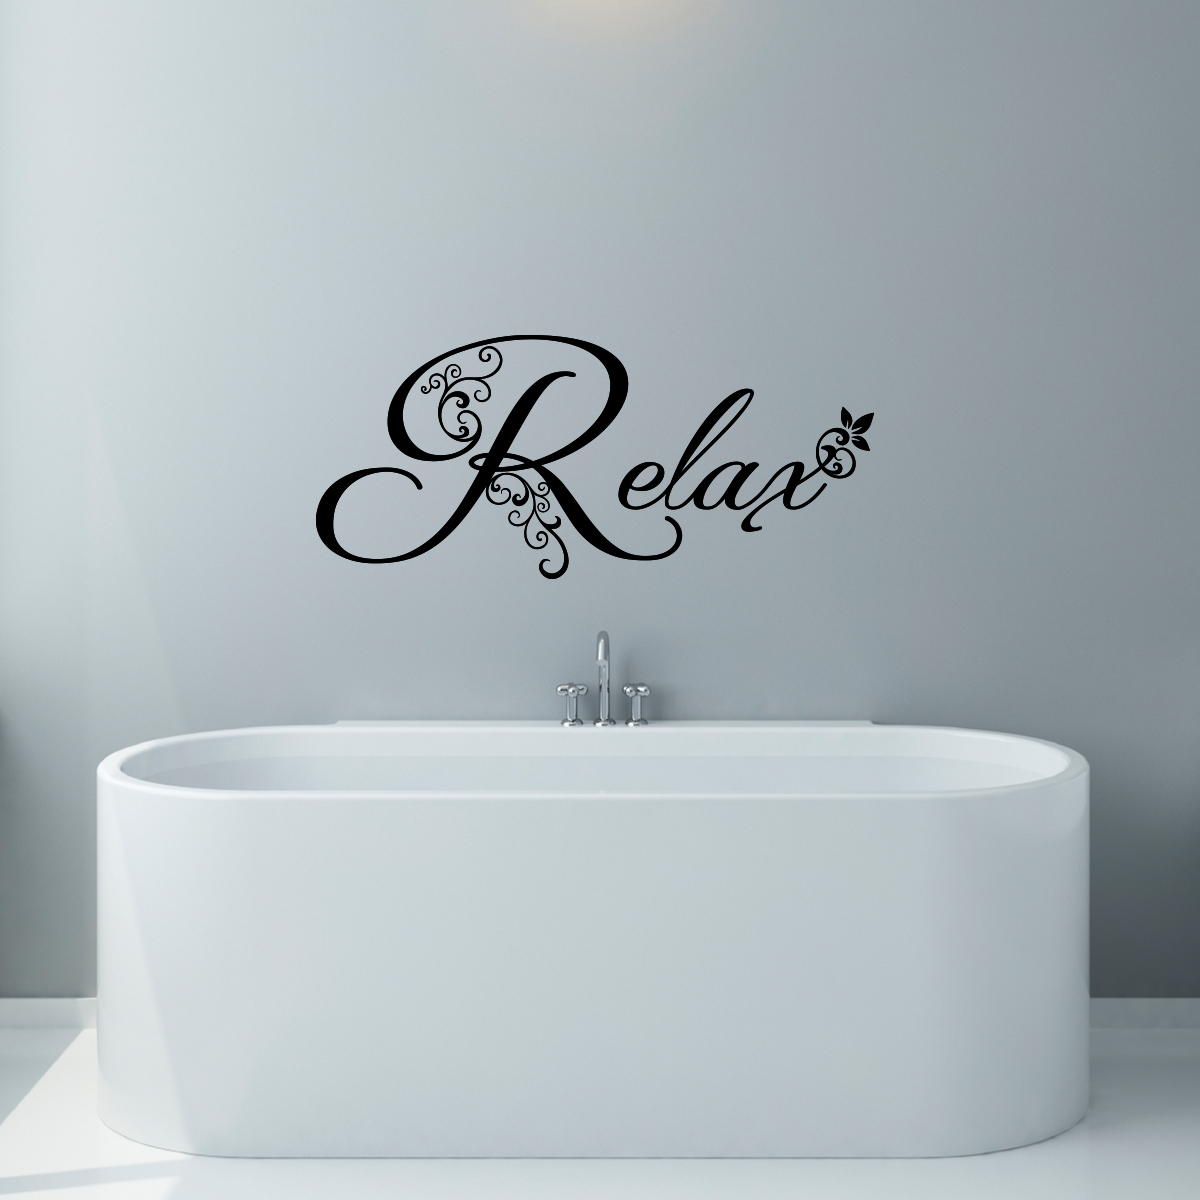 Wall decal Ambiance relax